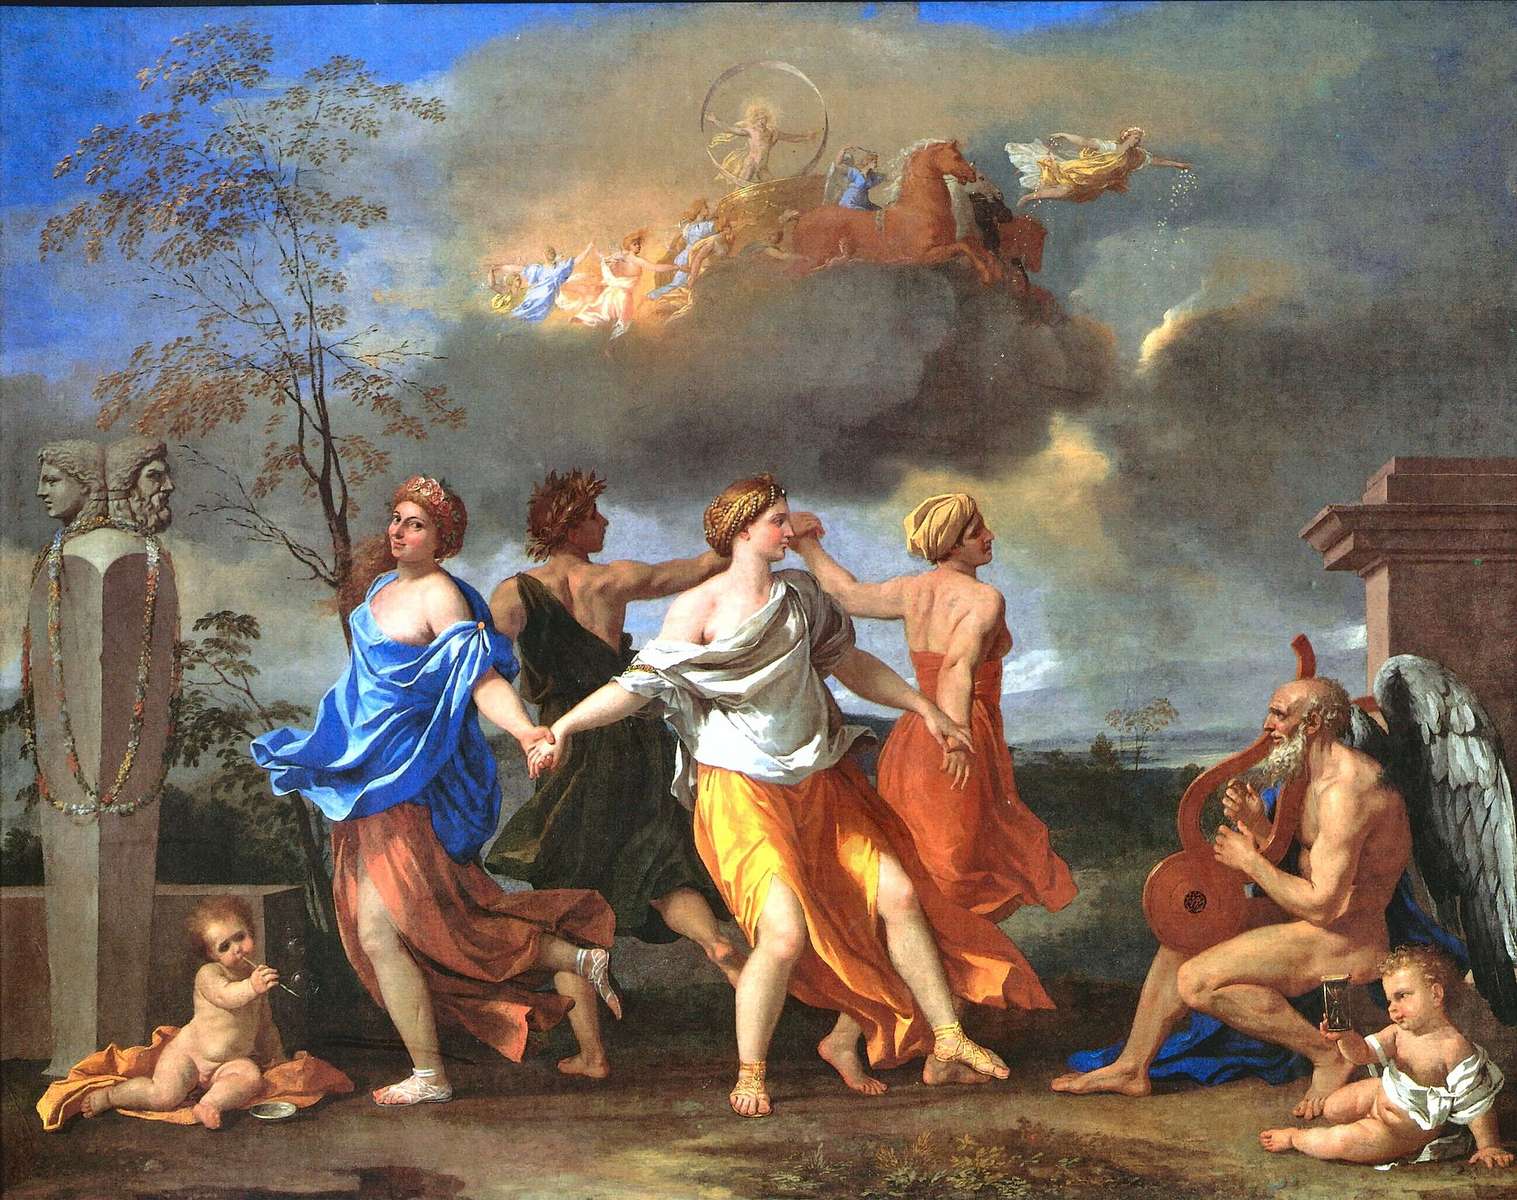 Poussin - A Dance to the Music of Time online puzzle